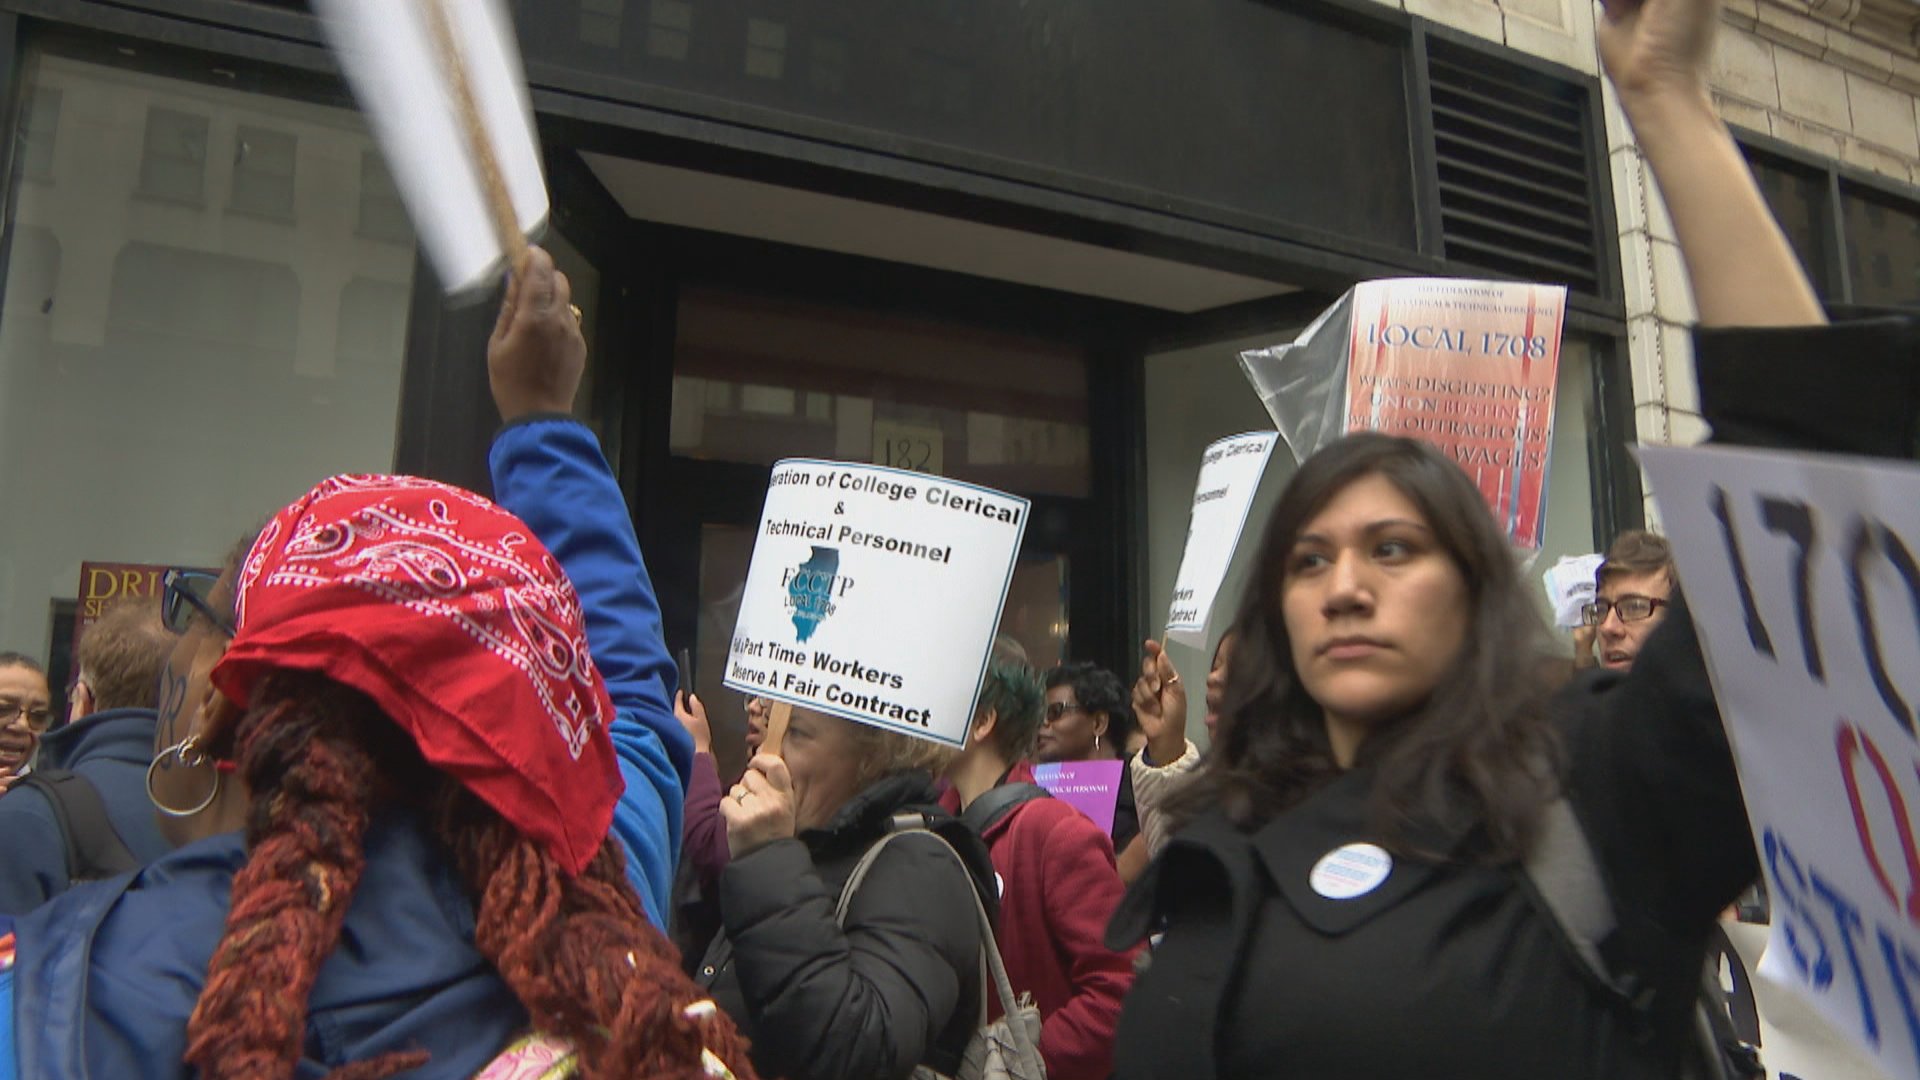 City Colleges of Chicago support staff announced a new contract on Thursday, May 2, 2019. Agreement was reached one day after the employees went on strike and held a rally downtown. (WTTW News)